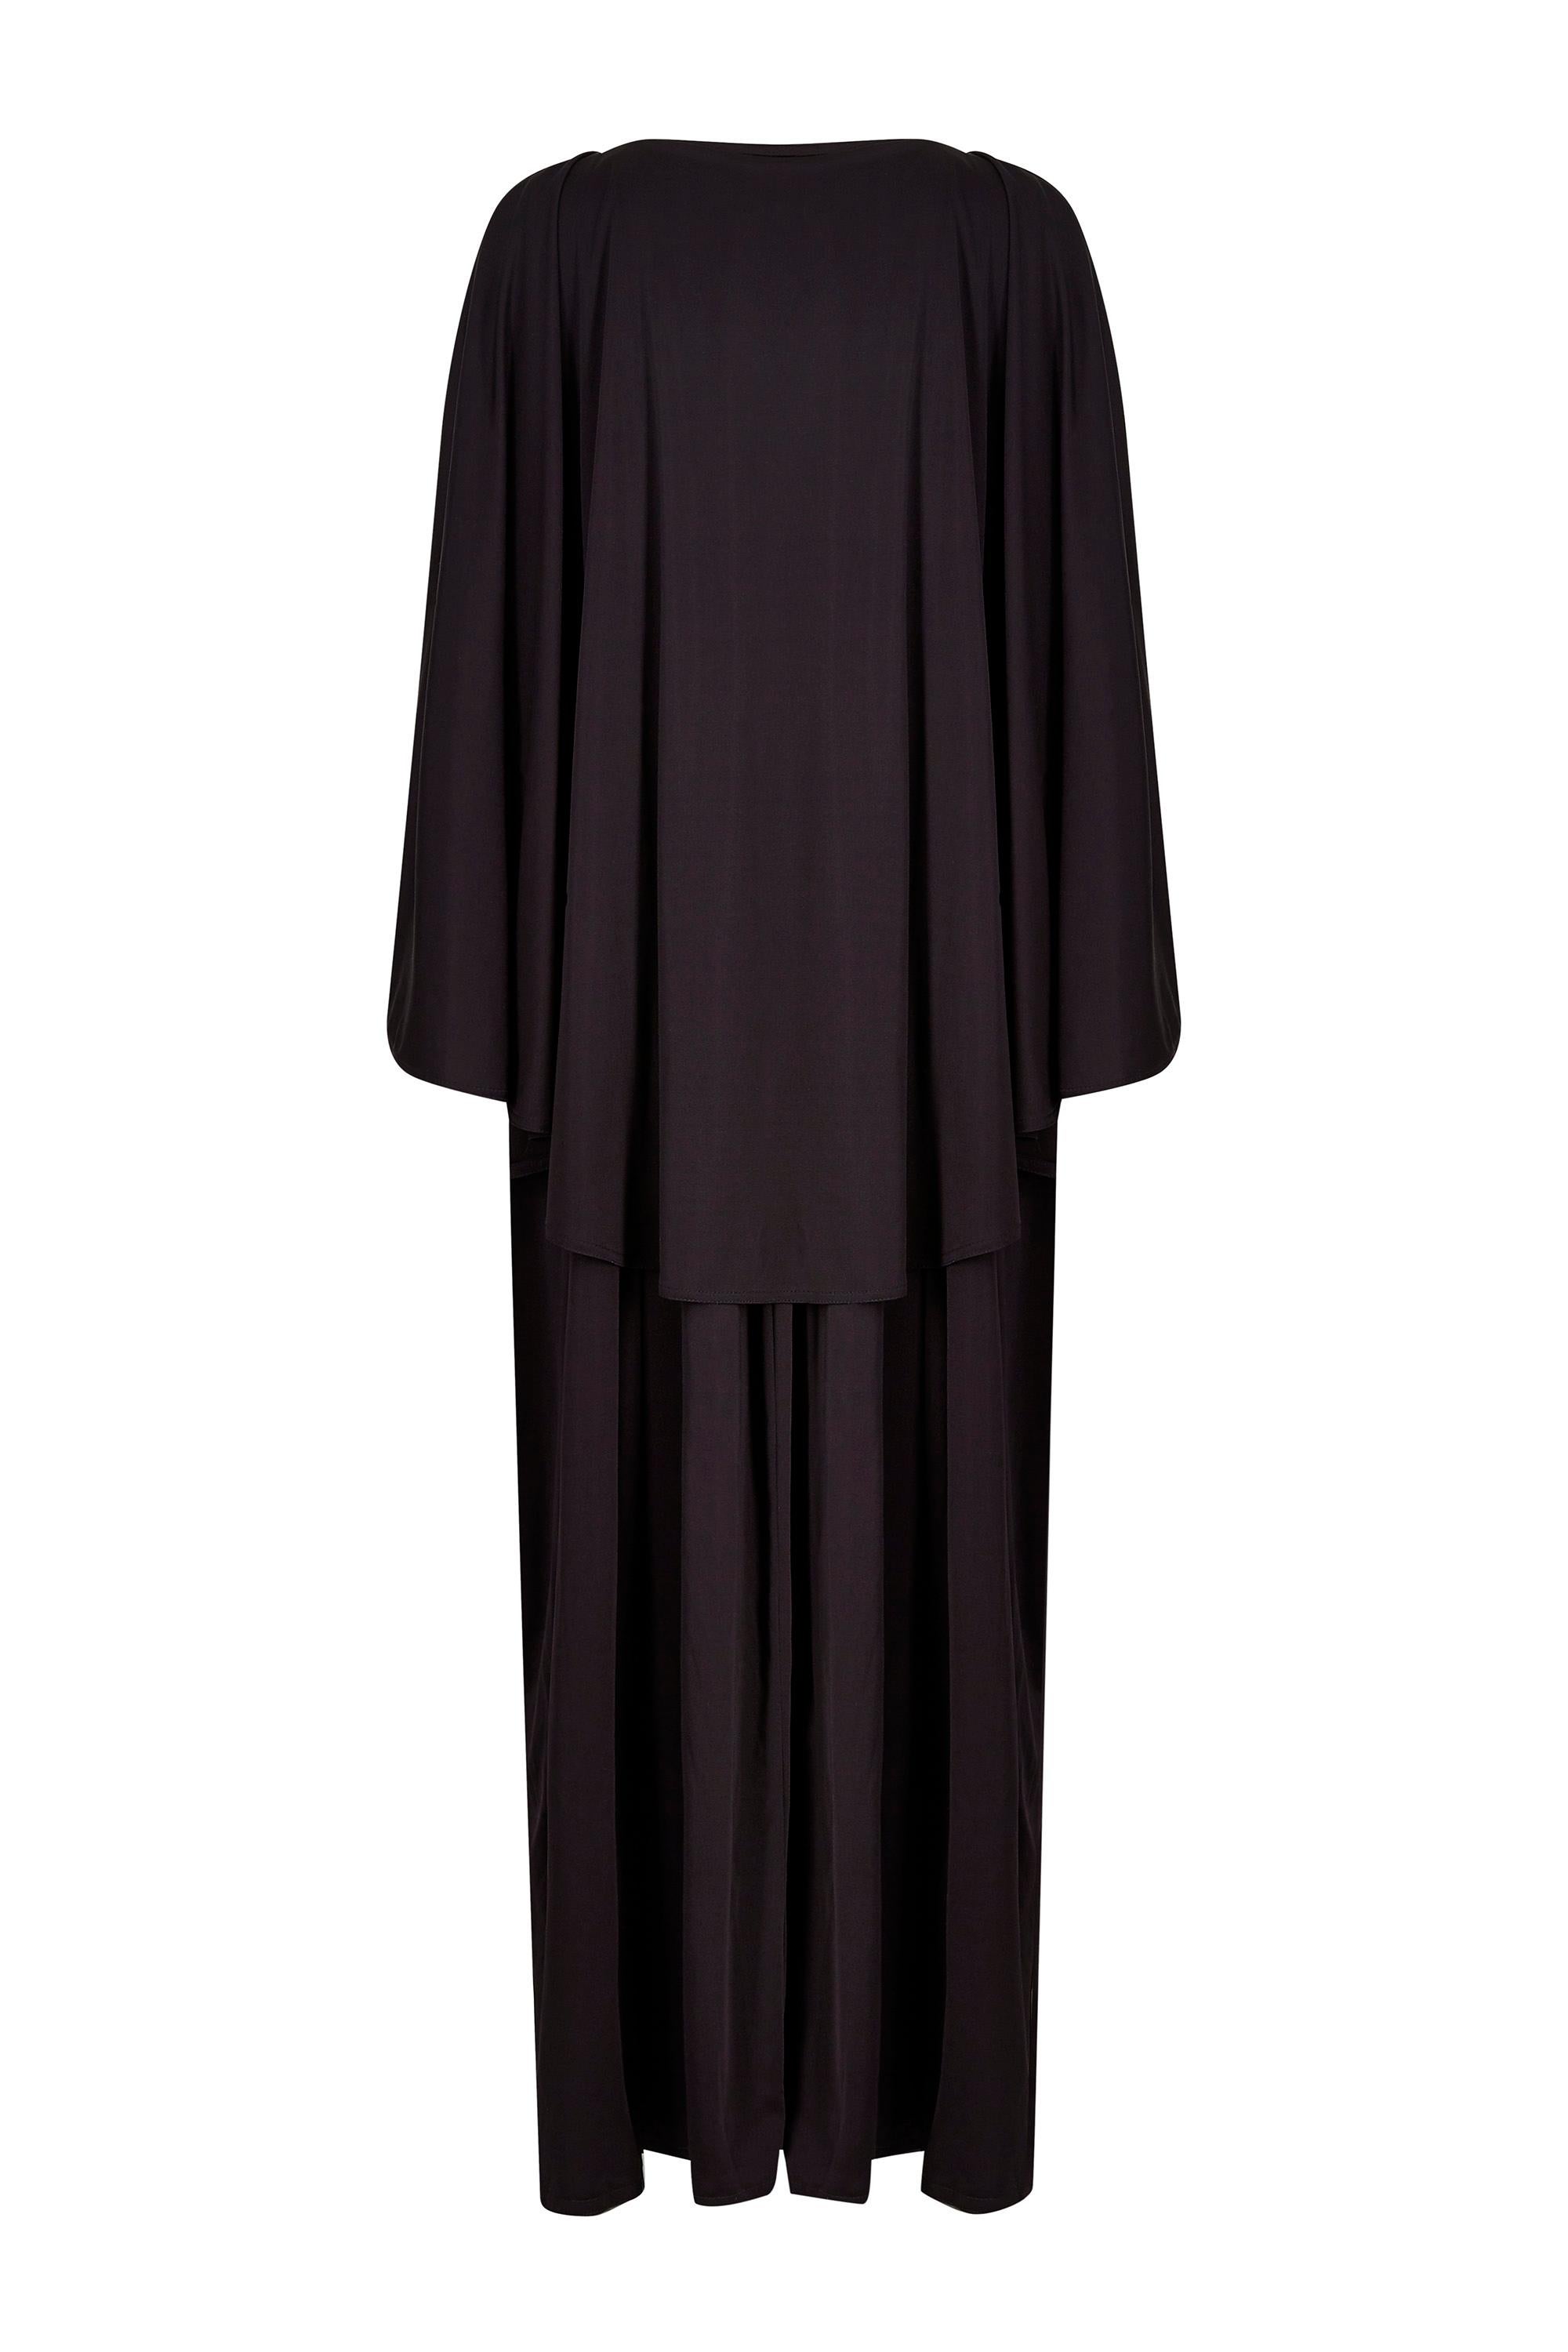 1970s Yuki For Rembrandt Draped Black Jersey Dress With Gathered Waistline In Excellent Condition In London, GB